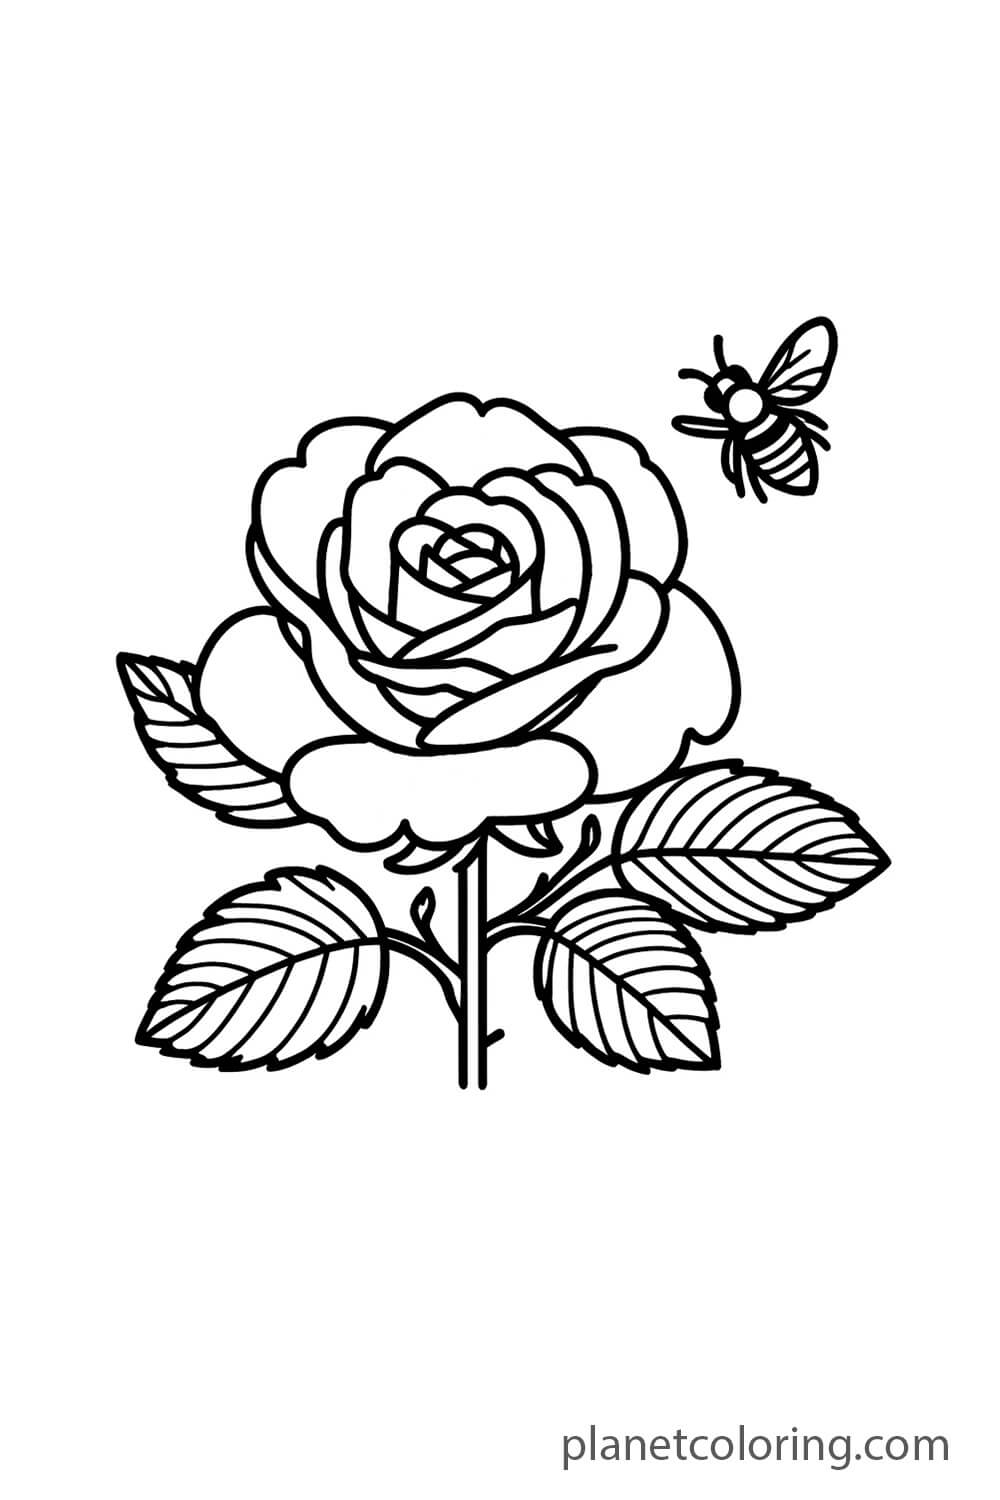 Rose and a Bee